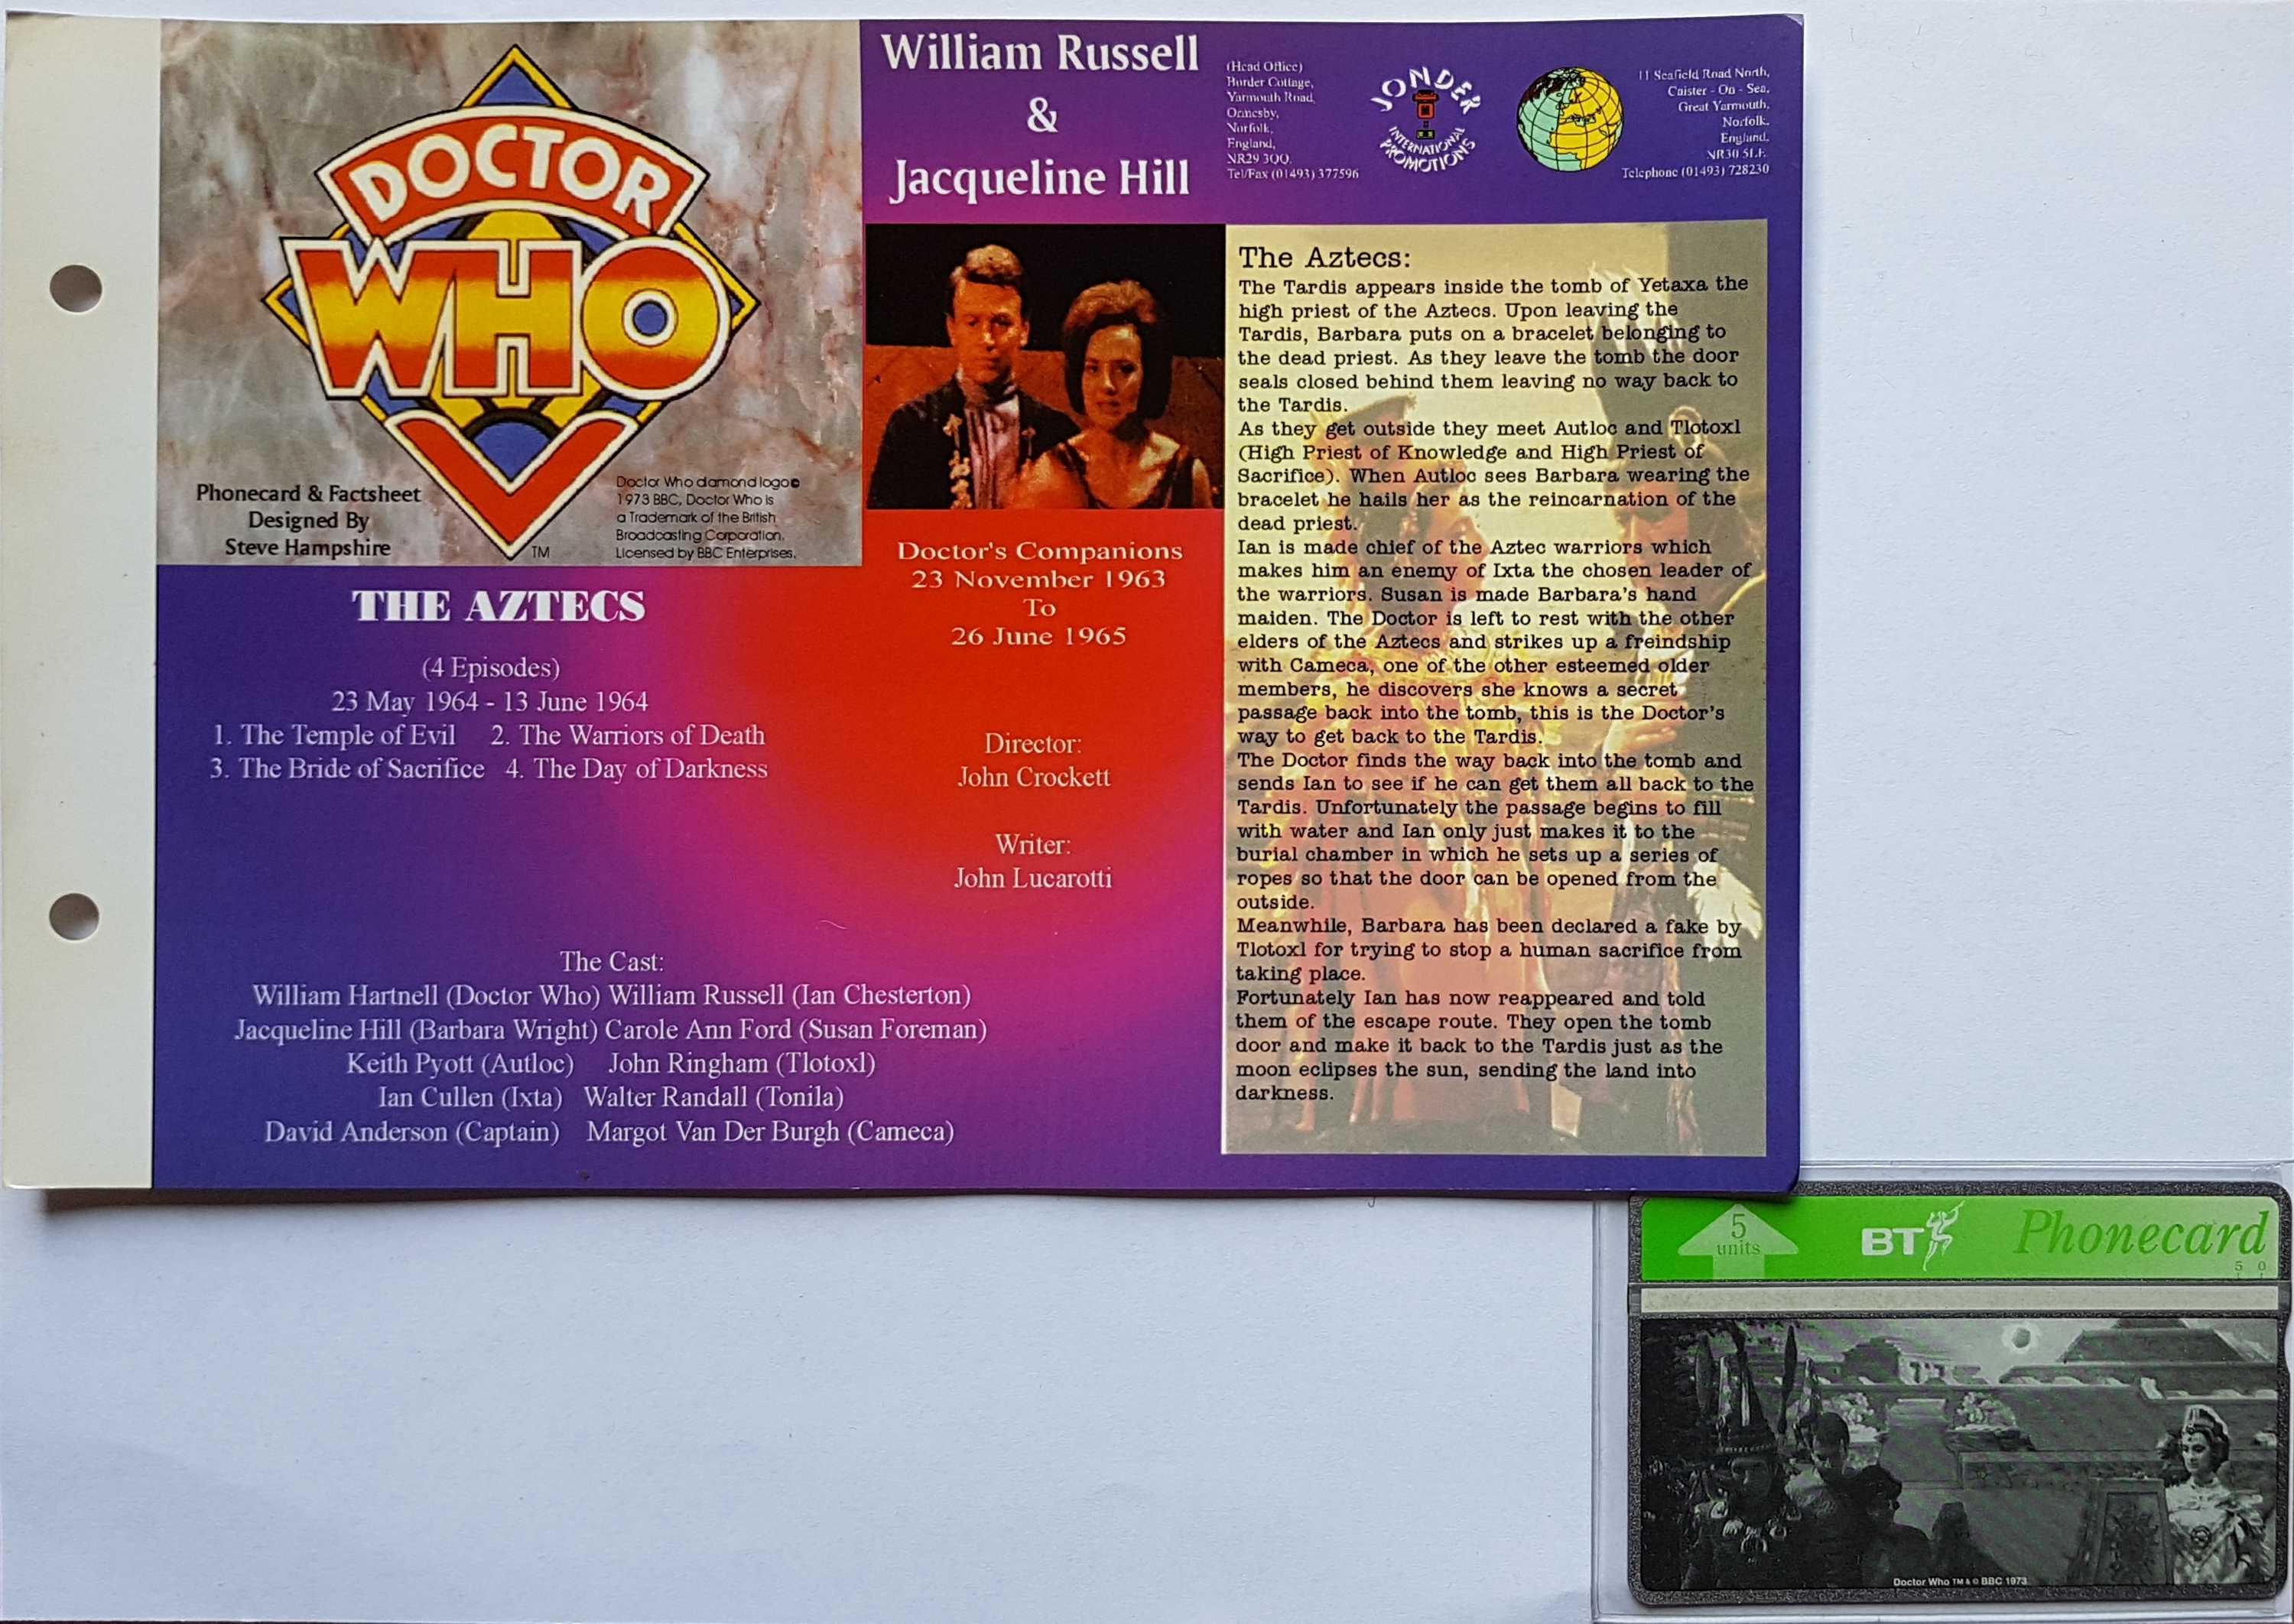 Picture of Doctor Who - The Aztecs - Phone card by artist  from the BBC anything_else - Records and Tapes library